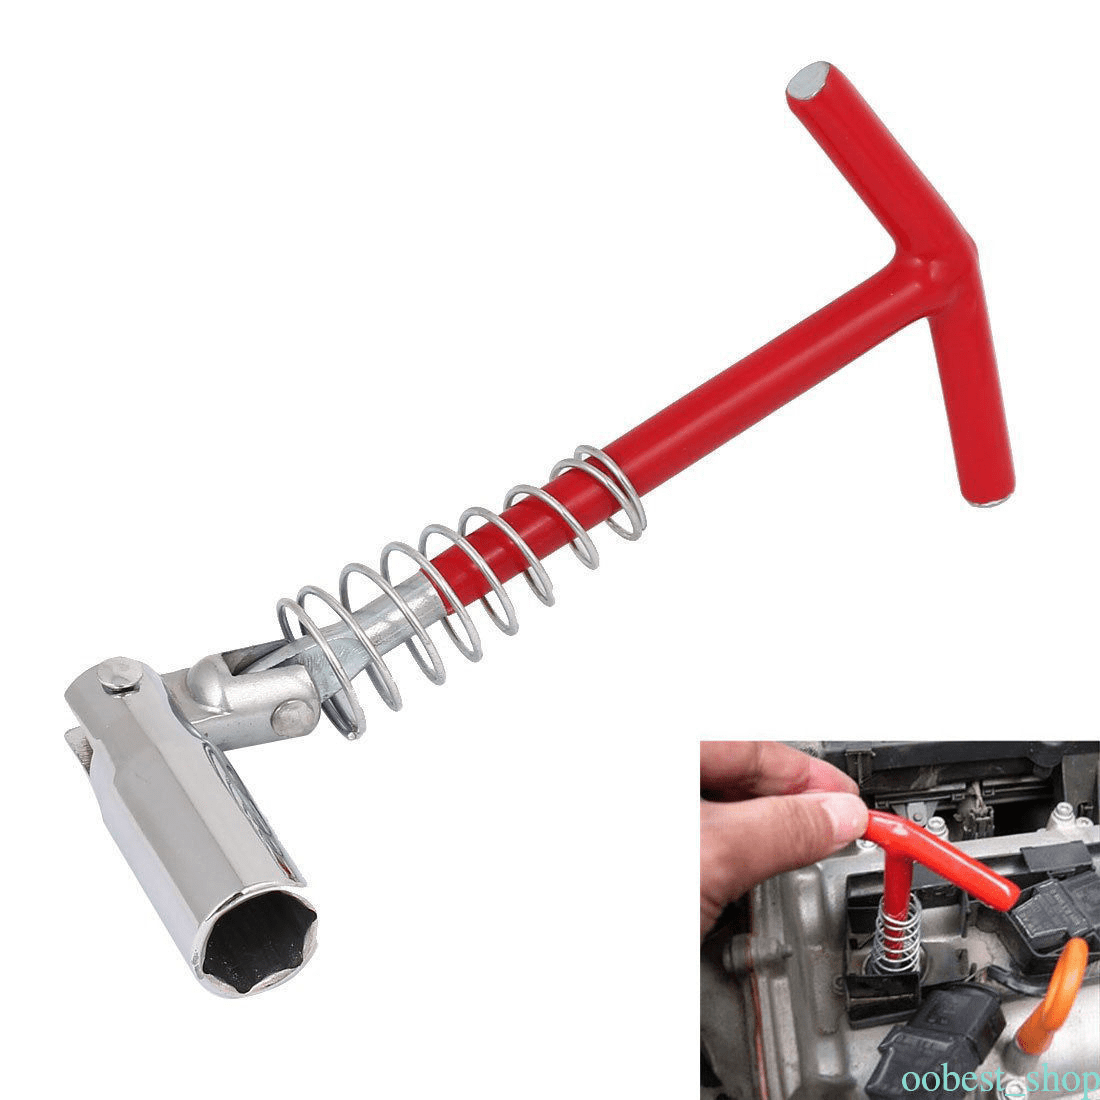 4 Spark Plug Removal Tool 21mm T-Handle Flexible Spanner Socket Wrench Set 